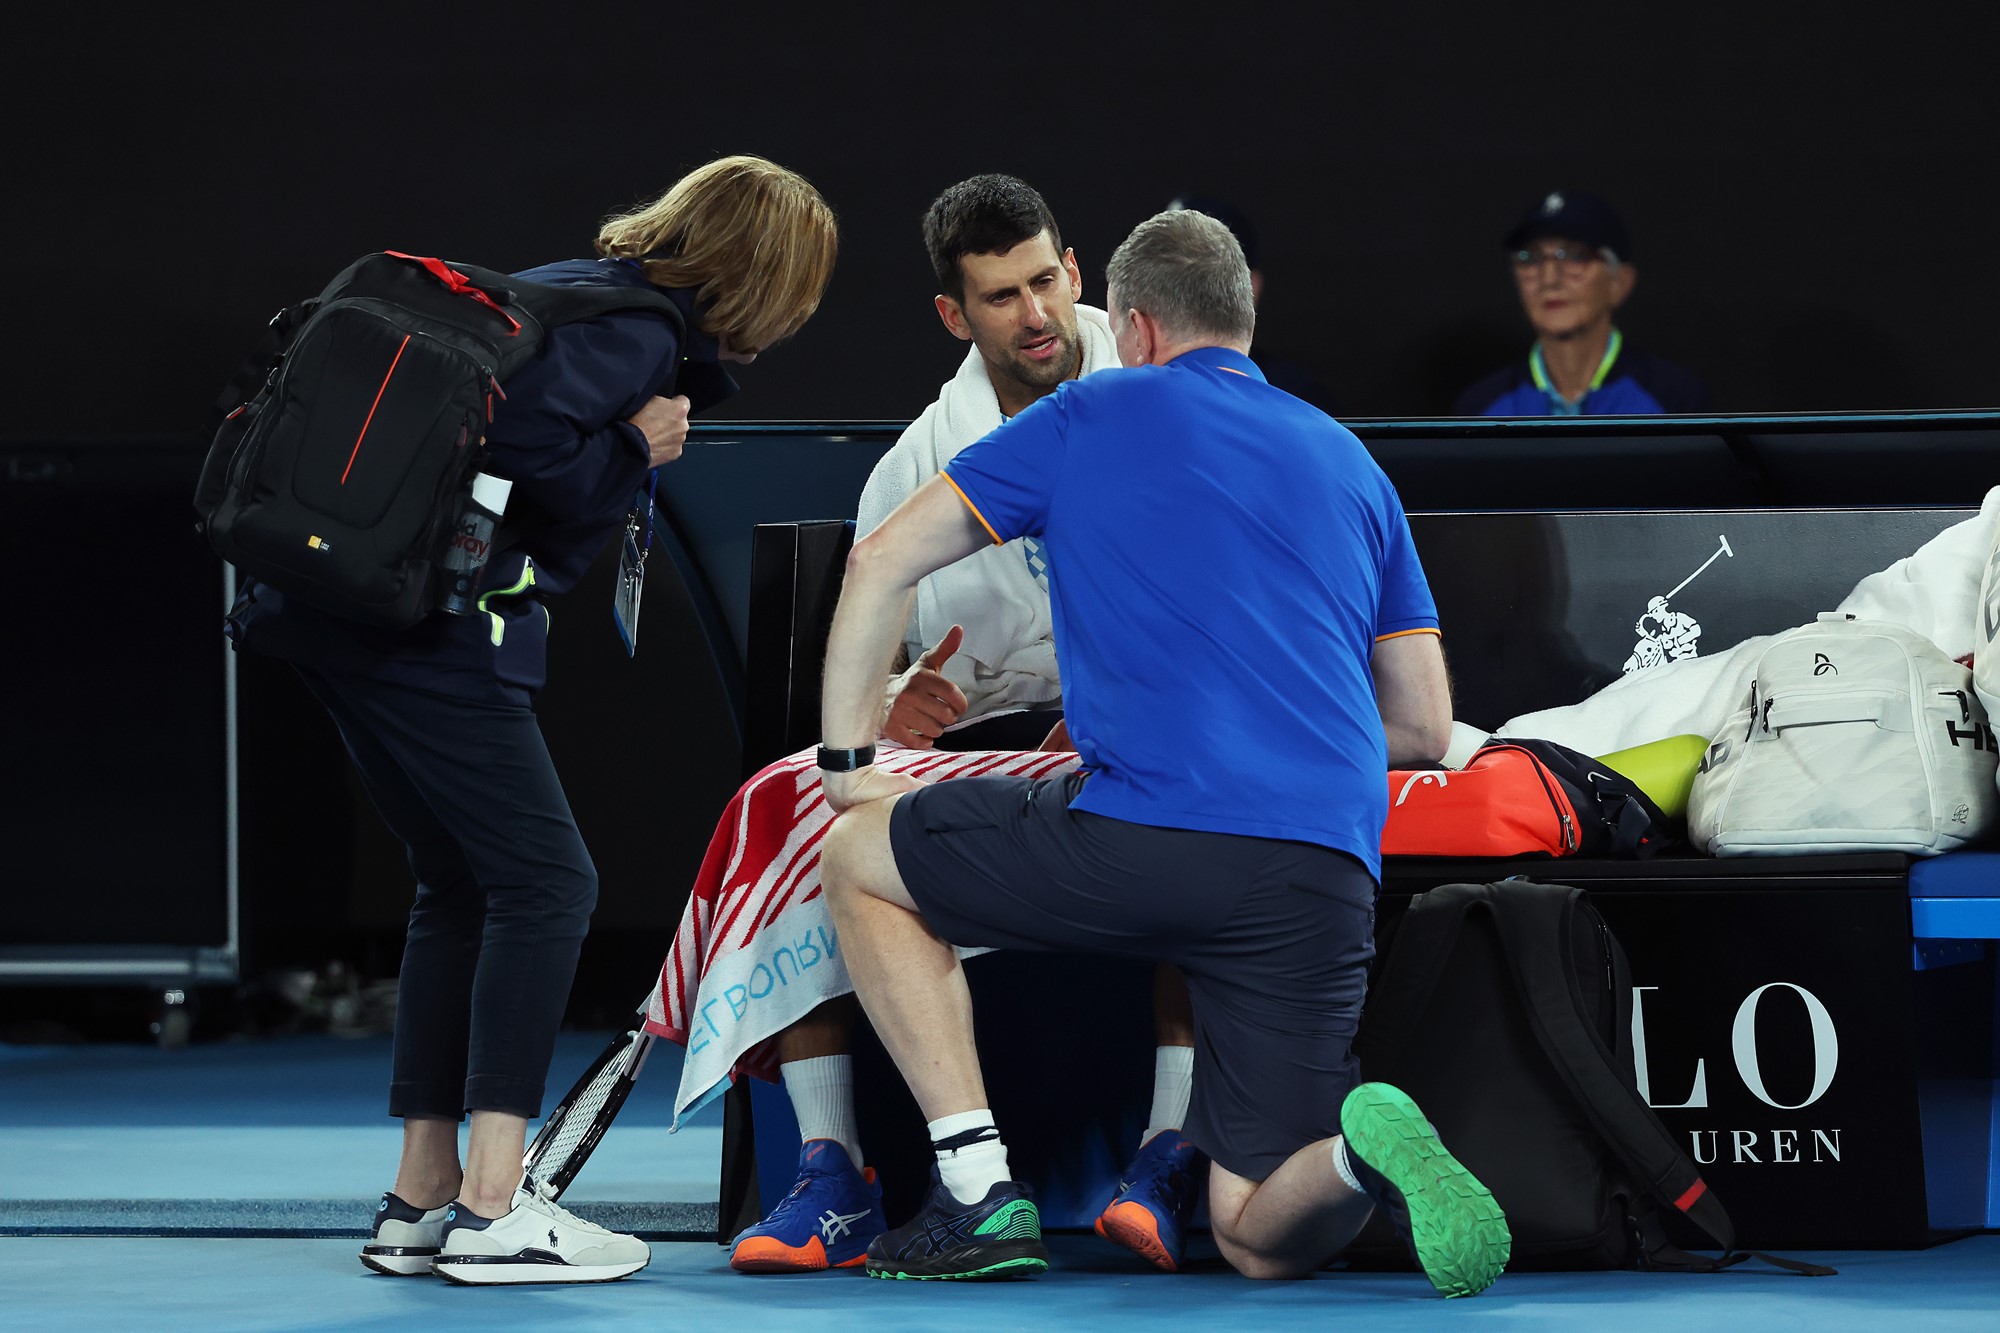 Physiotherapists check on a tennis player.